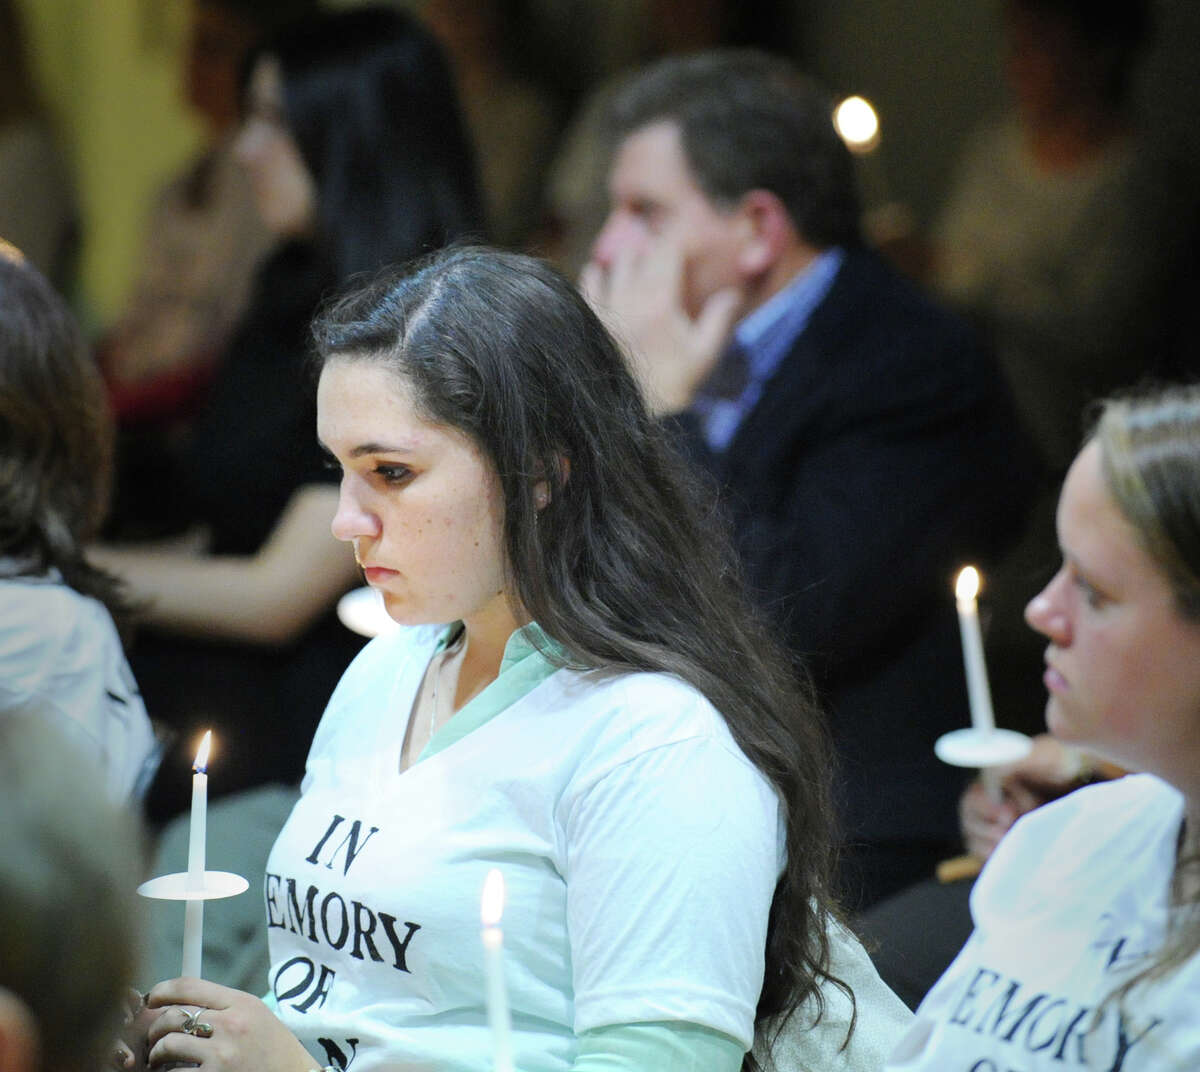 Jody Greene, 17, a Greenwich High School senior, during the candlelight vigil ceremony to observe Domestic Violence Awareness Month at the Greenwich YWCA, Thursday night, Oct. 25, 2012.